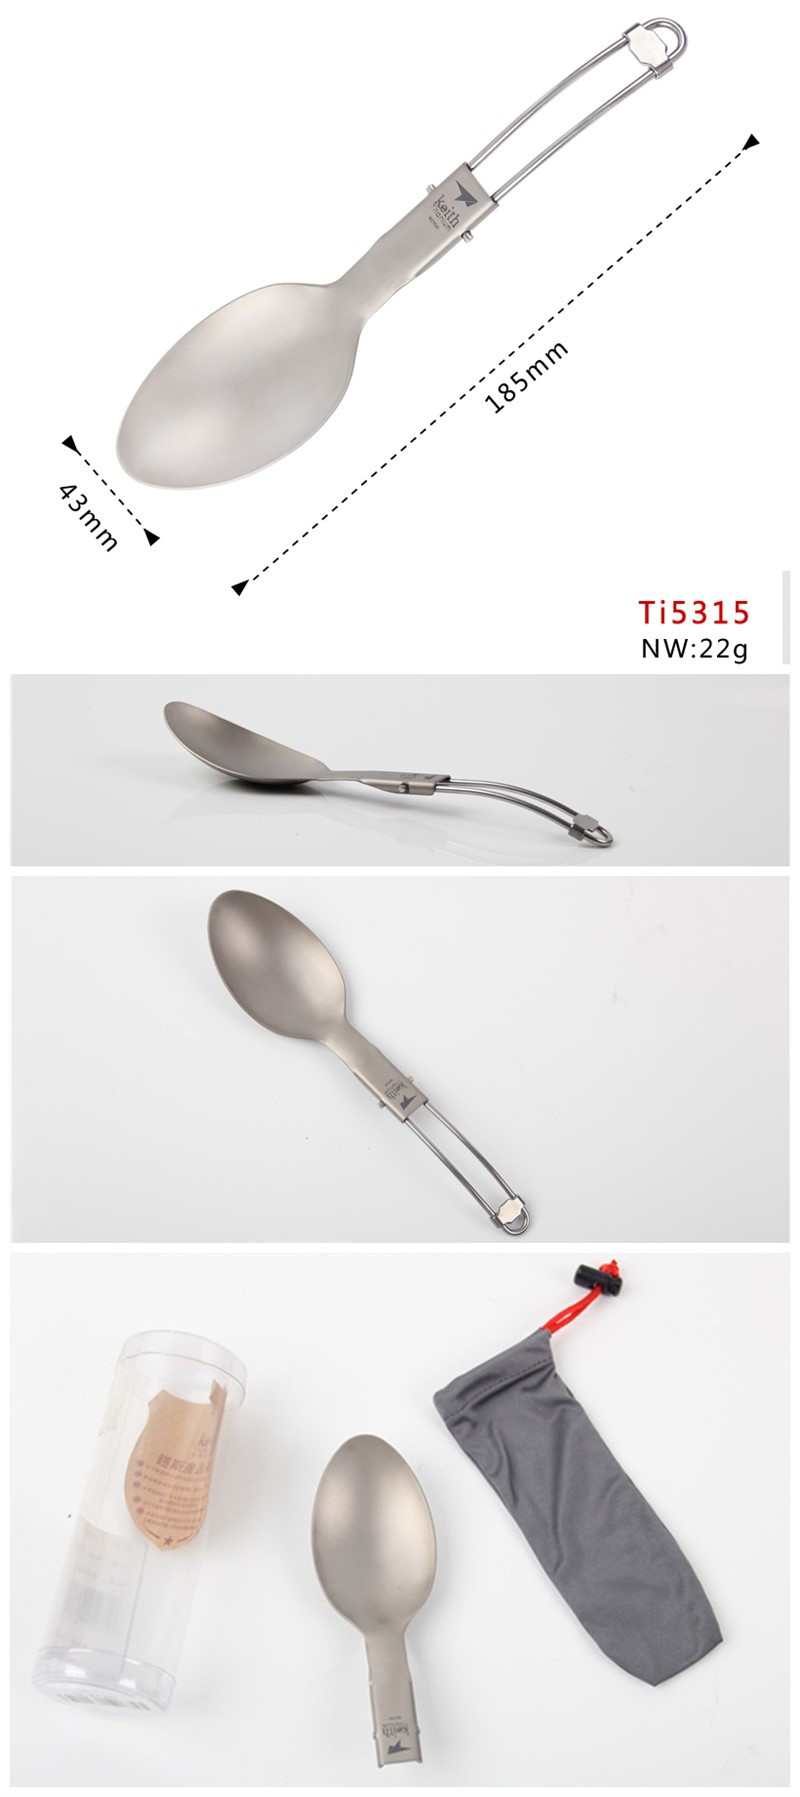 Keith Ti5315 Folding Titanium Spoon Ultralight 16g Outdoor Camping Travelling Foldable Tableware